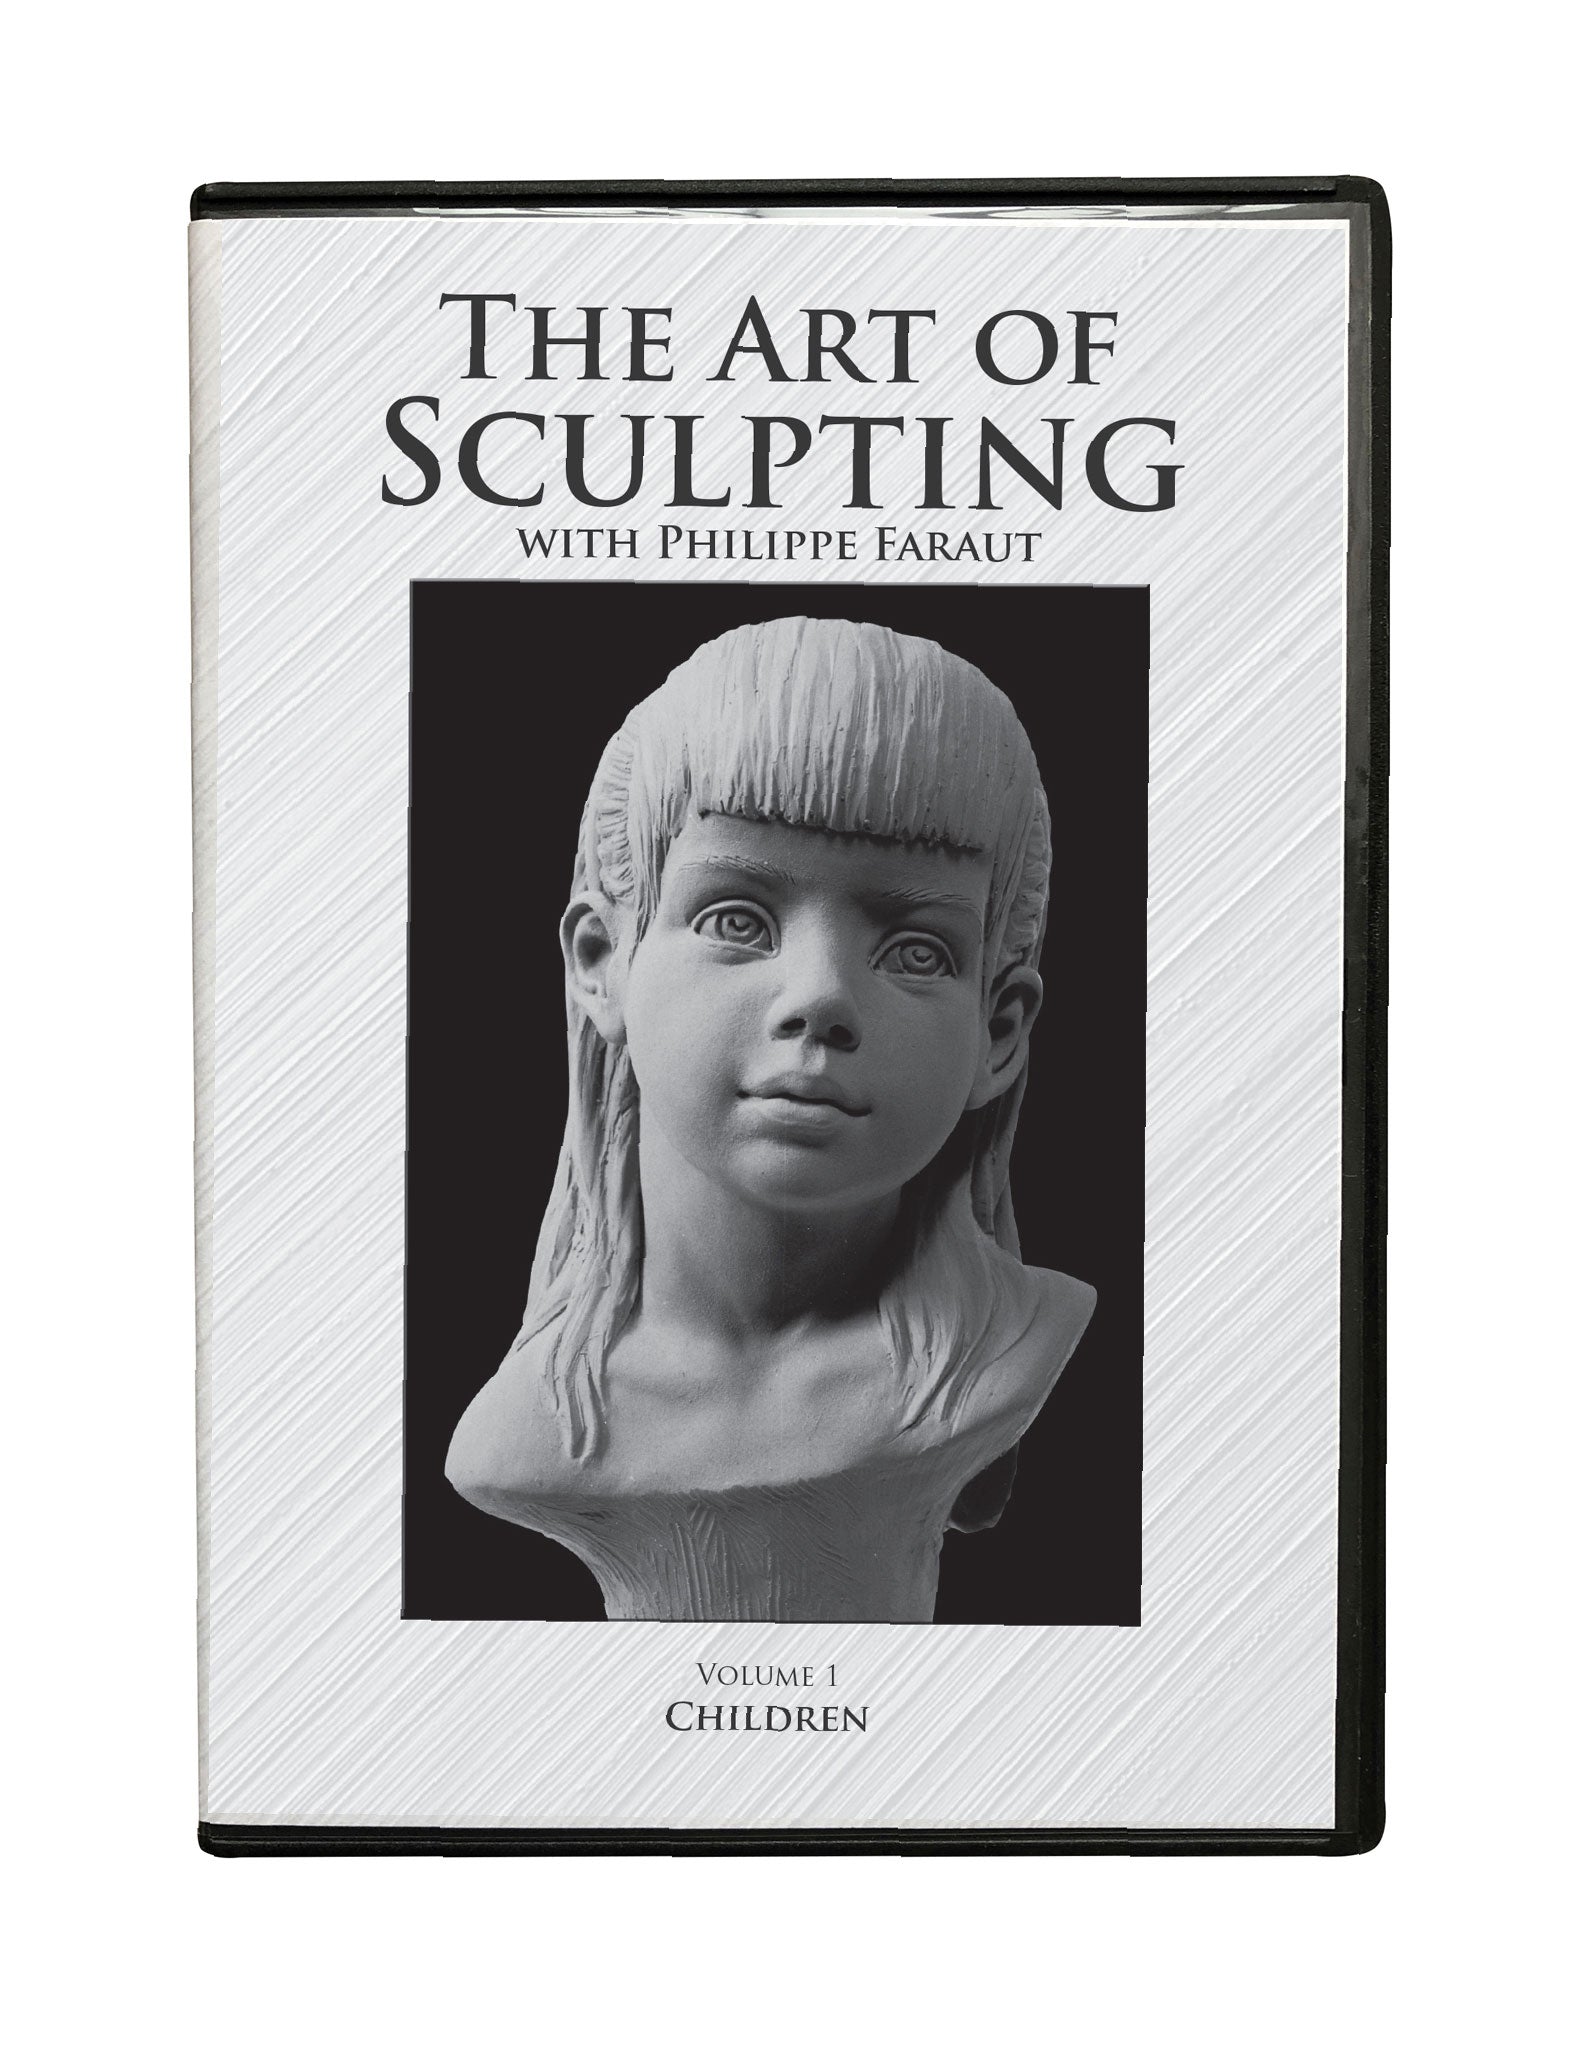 DVD #1: The Art of Sculpting with Philippe Faraut: Children